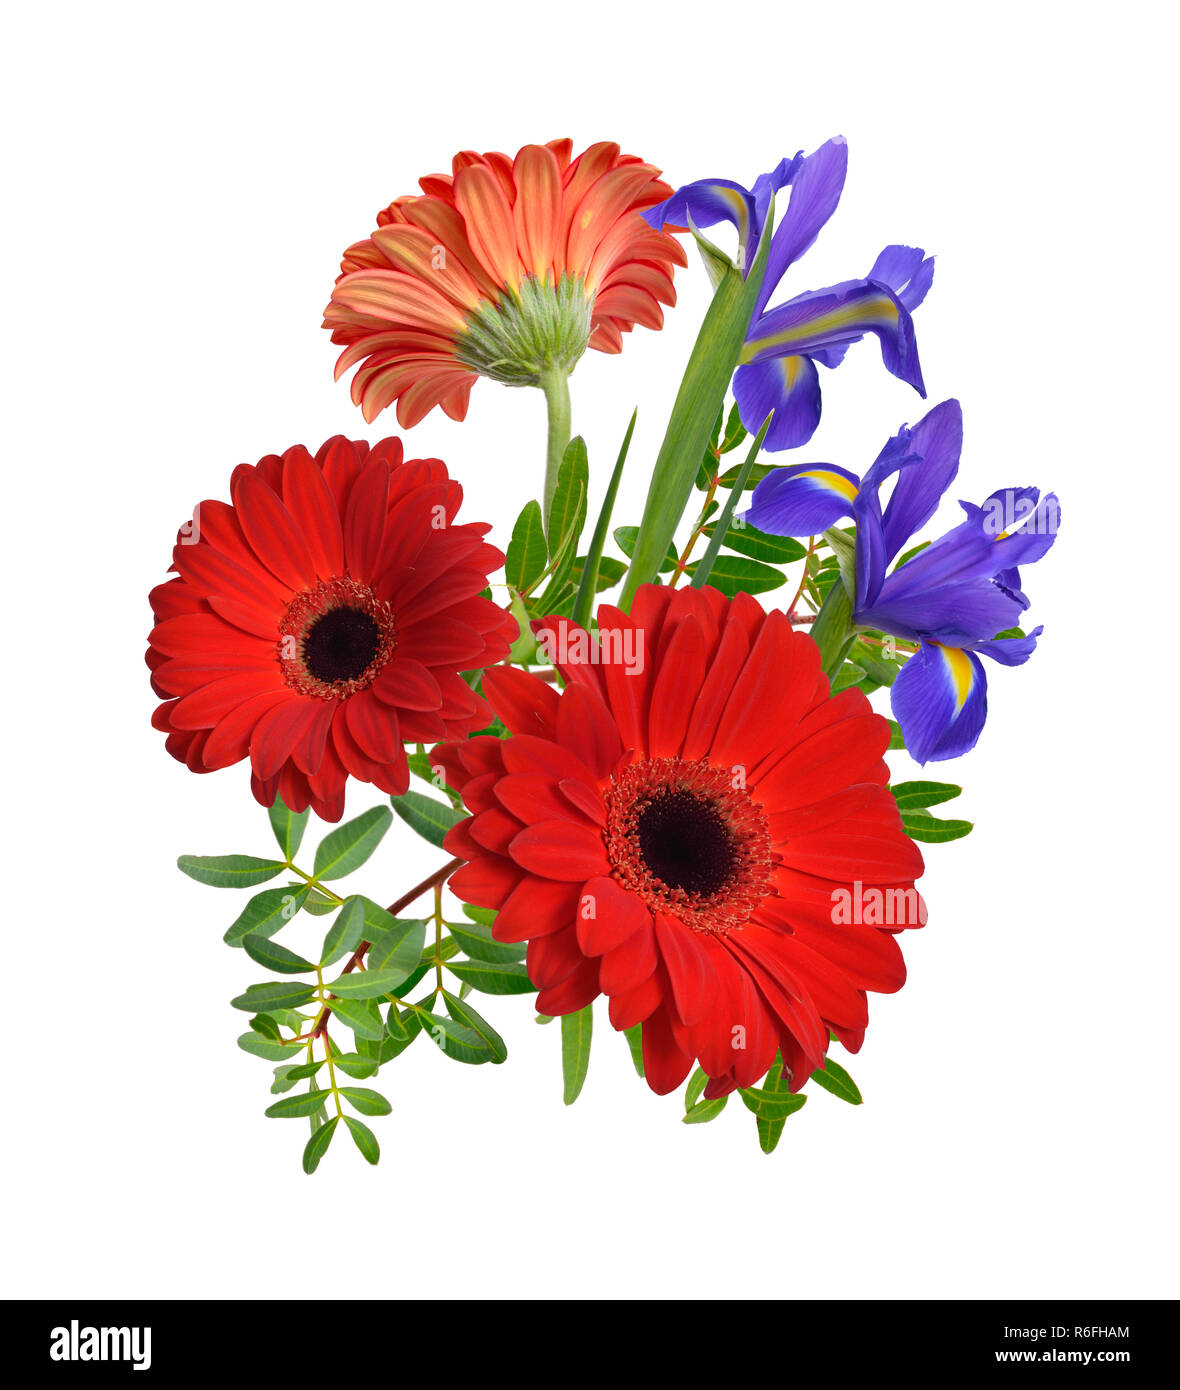 Composition with red gerbera and iris flowers. Isolated. Stock Photo